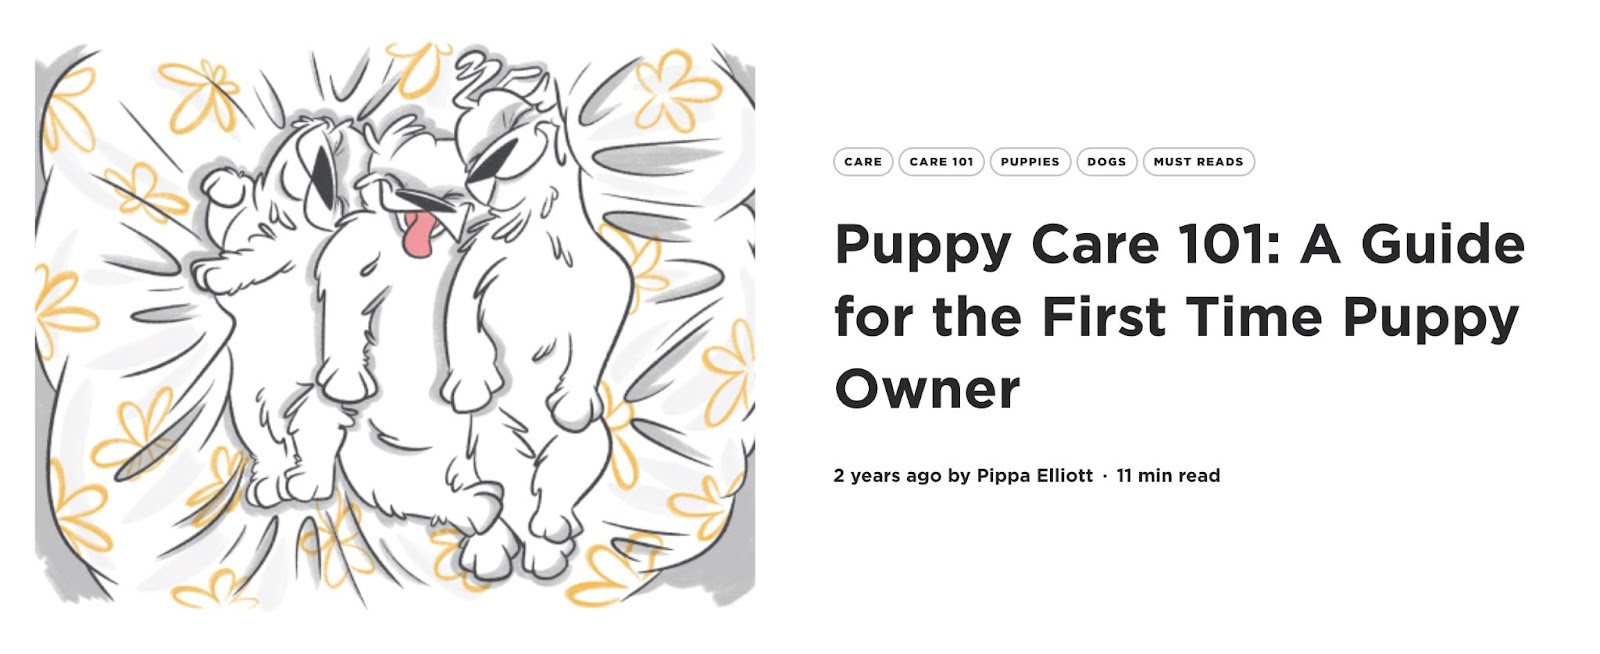  A Guide for the First Time Puppy Owner"